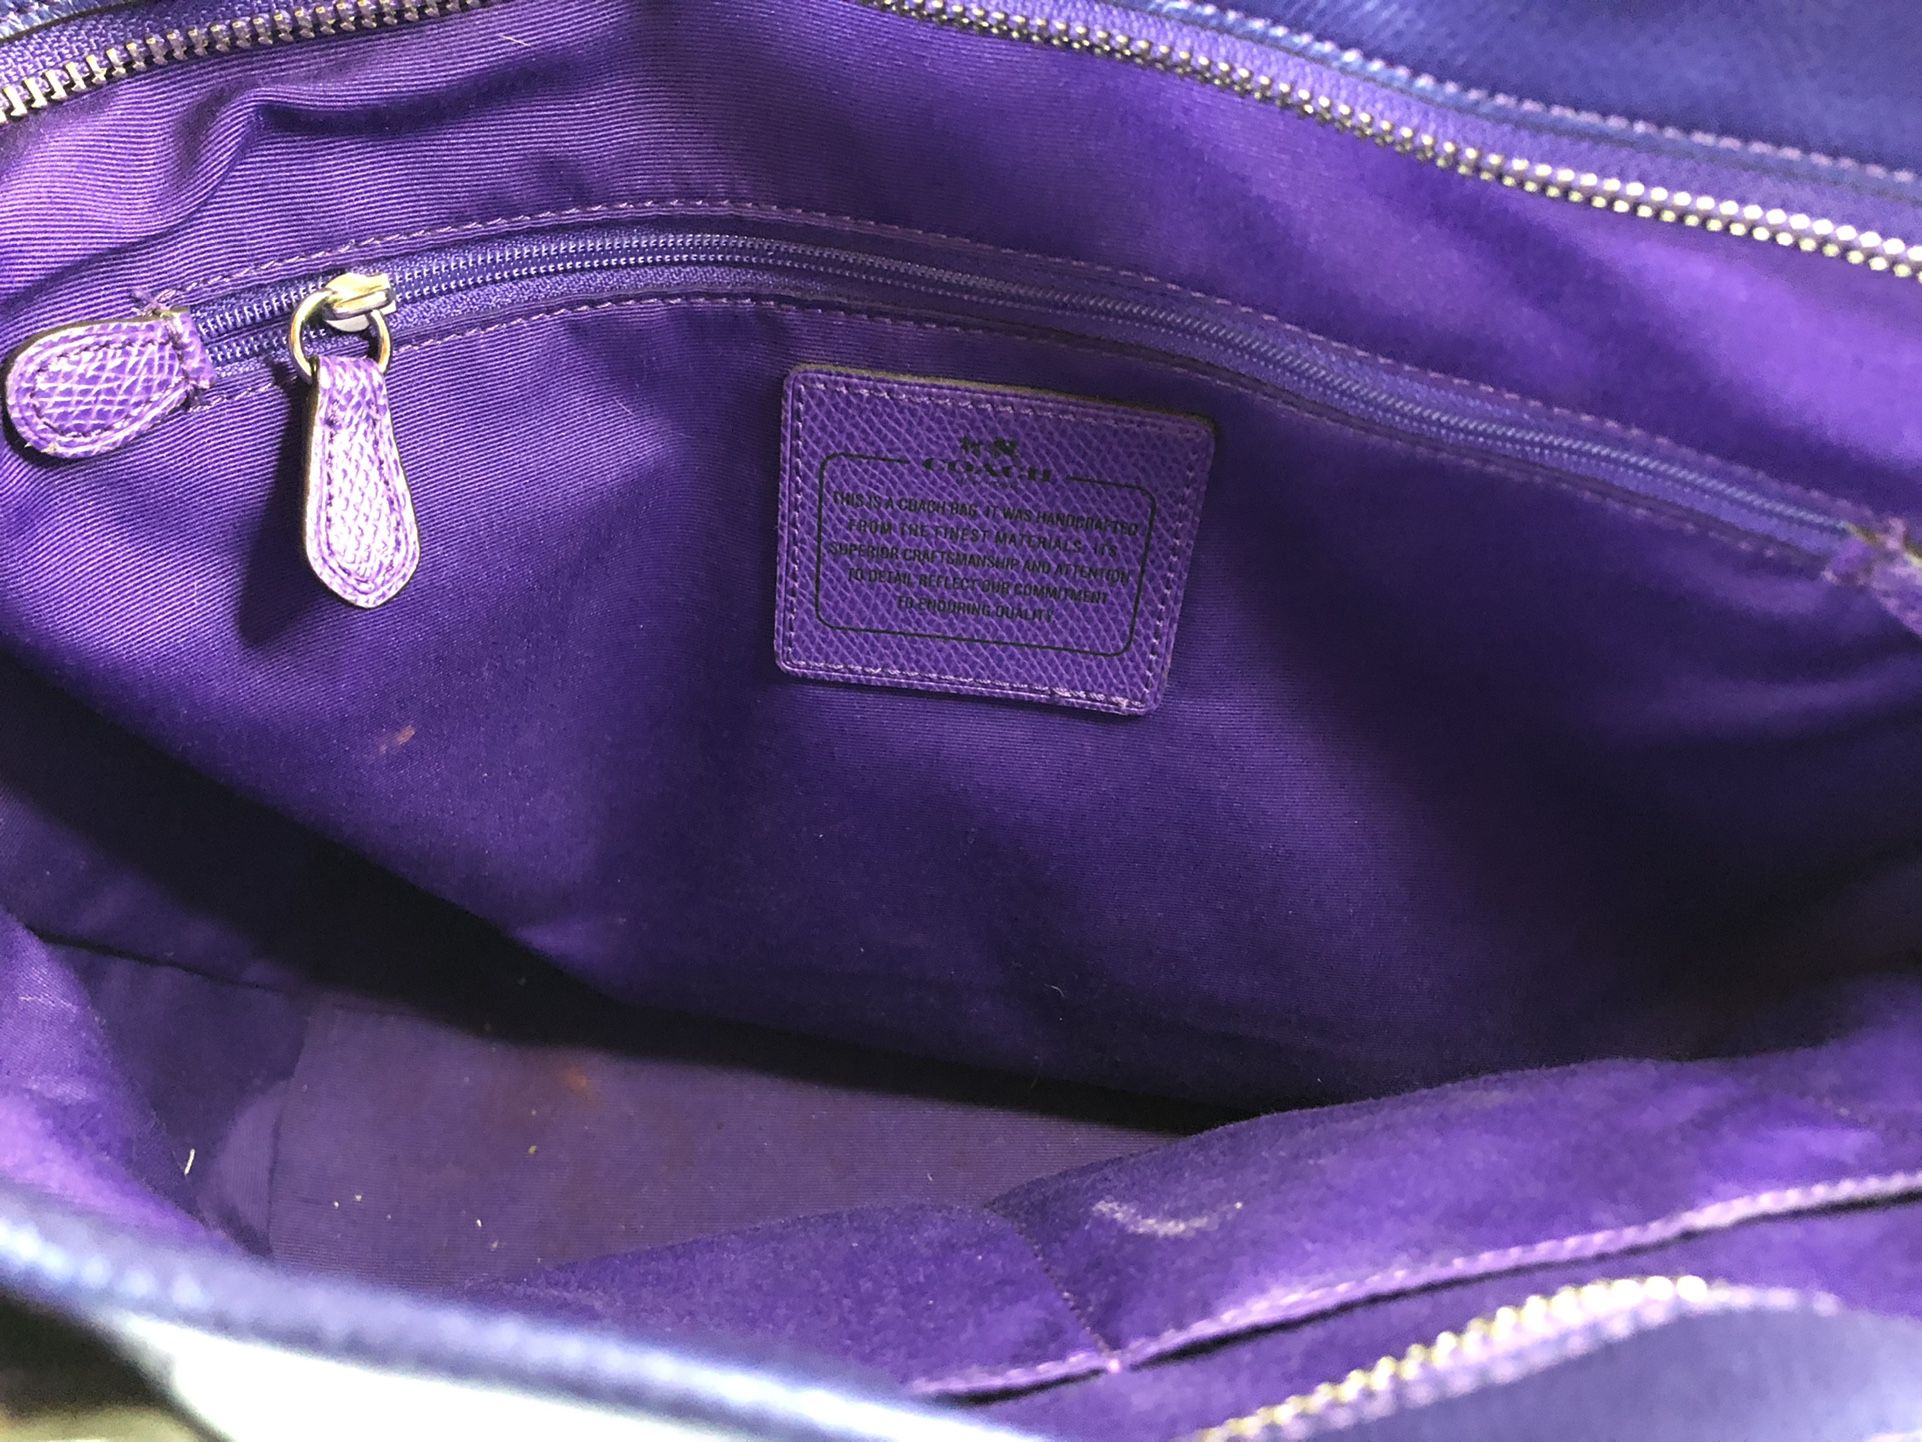 COACH PURPLE ULTRA VIOLET TOTE BAG with zipper for Sale in